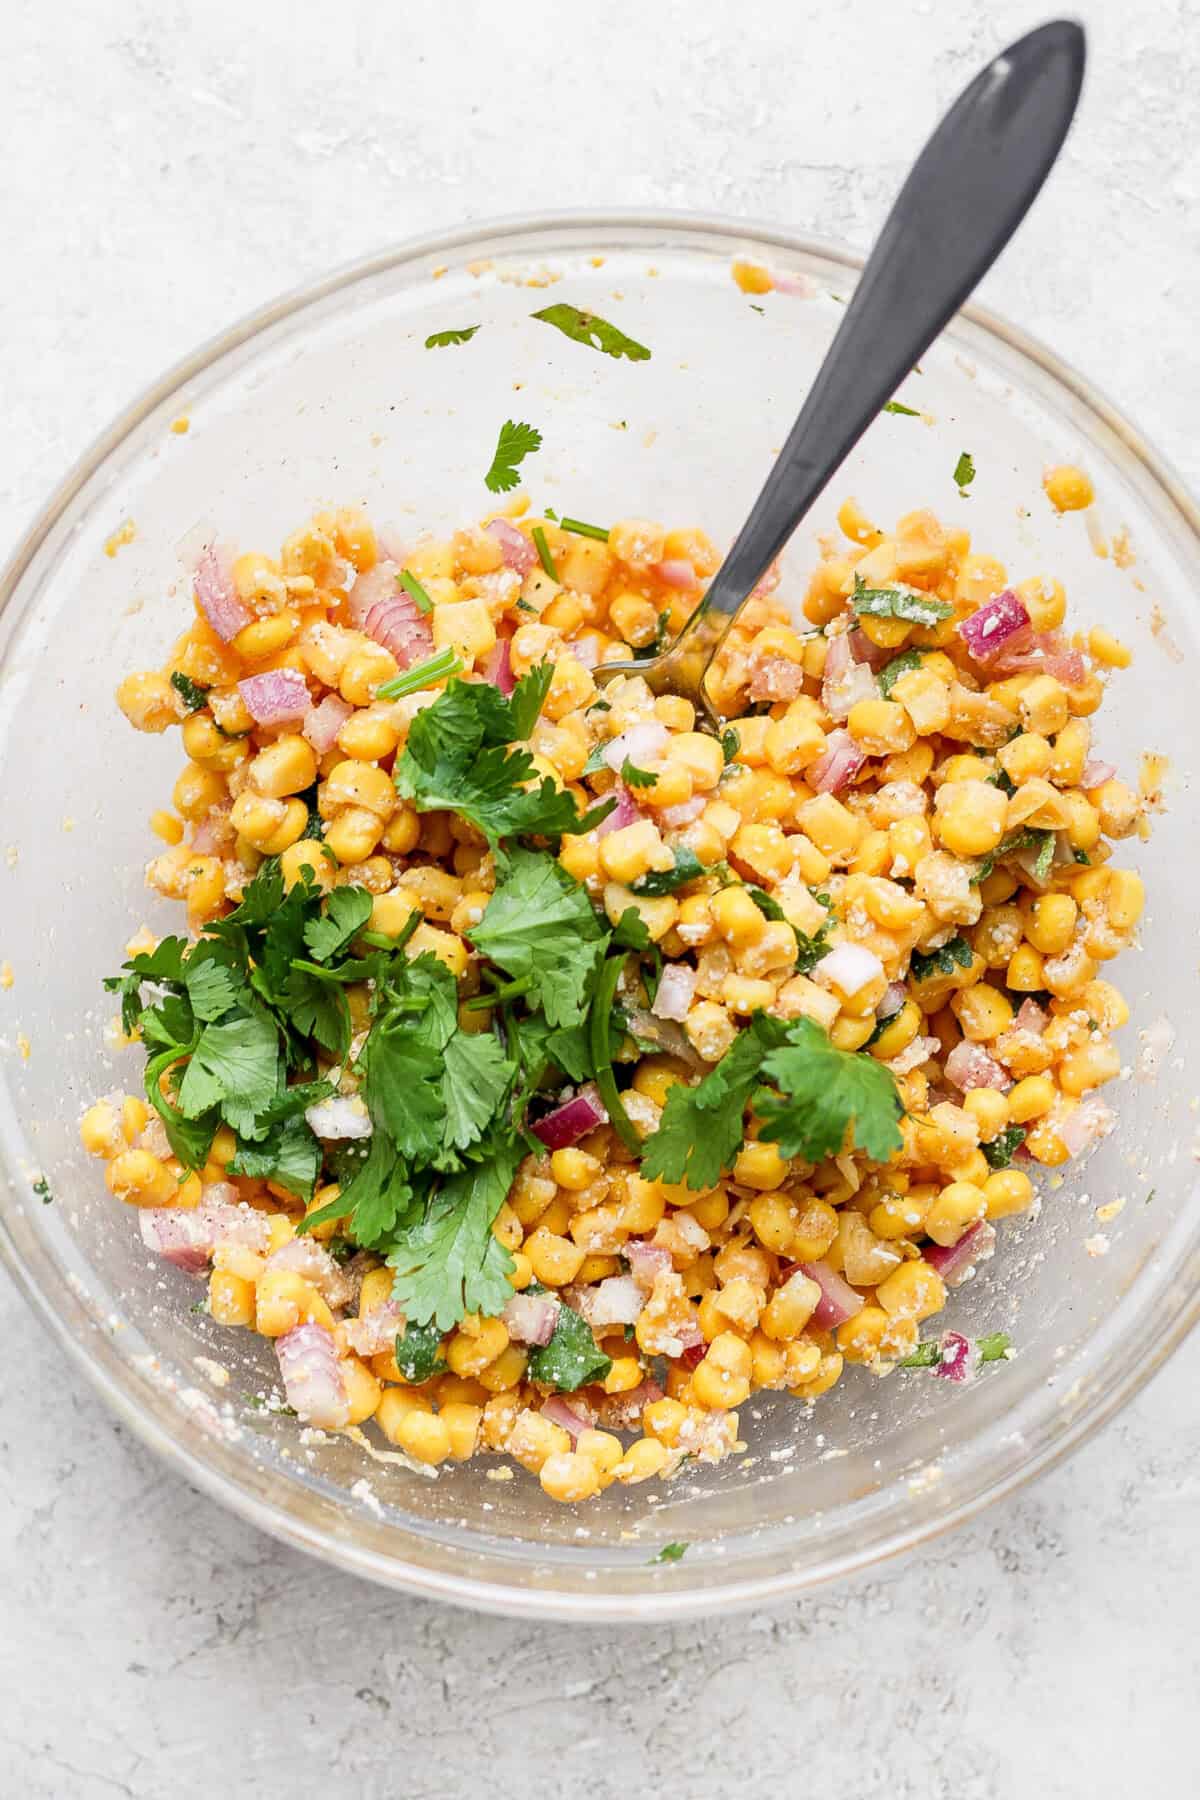 Mexican corn salad with slow cooker carnitas served in a glass bowl.